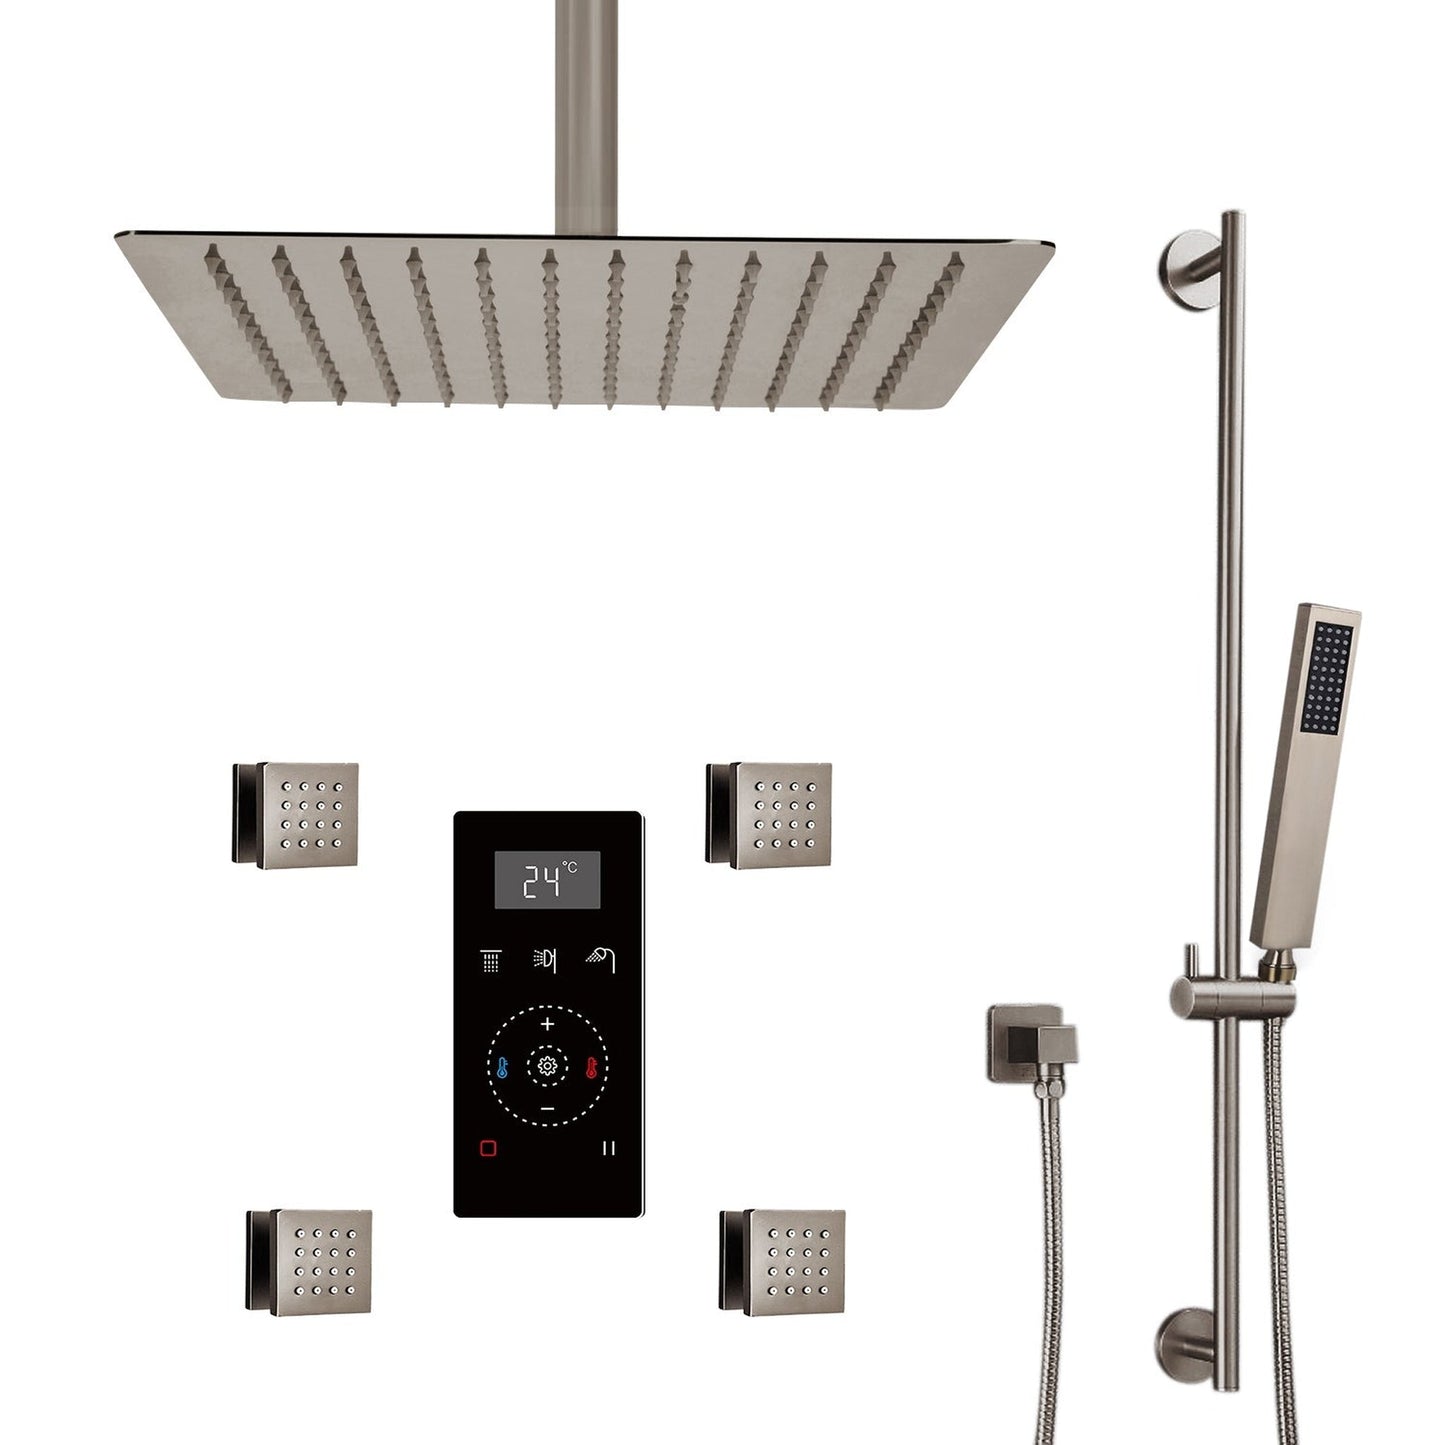 Fontana 20" Brushed Nickel Ceiling Mounted Rainfall Digital Thermostat Mixer Shower System With 4-Jet Body Spray, Hand Shower and Without Water Powered LED Lights